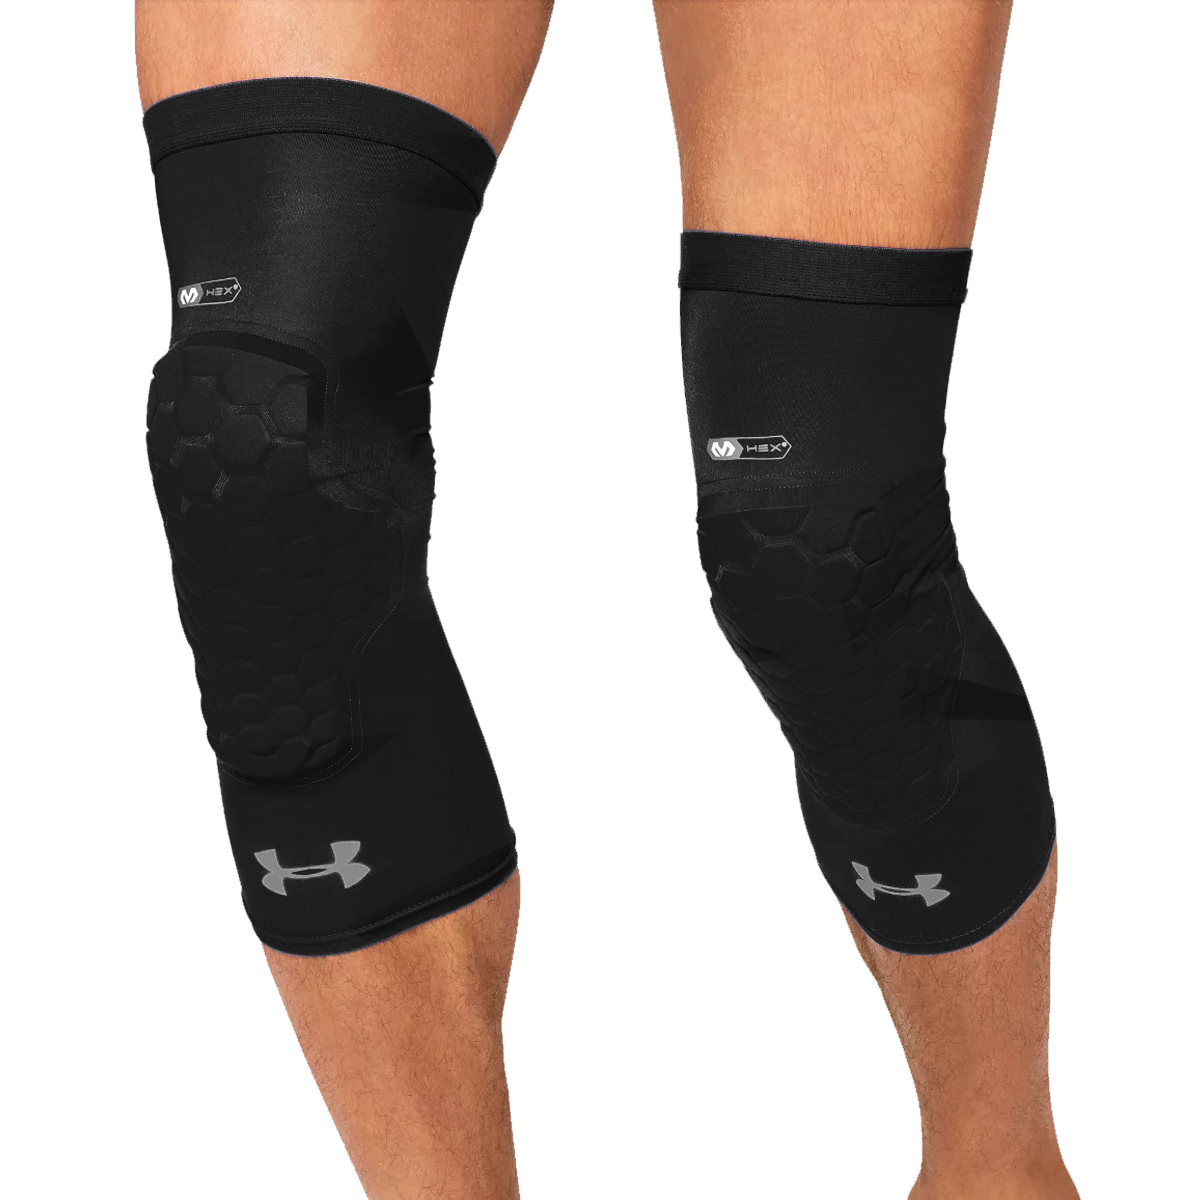 New McDavid Sport Hex Tech Padded Protective Compression Leg Sleeves L/XL